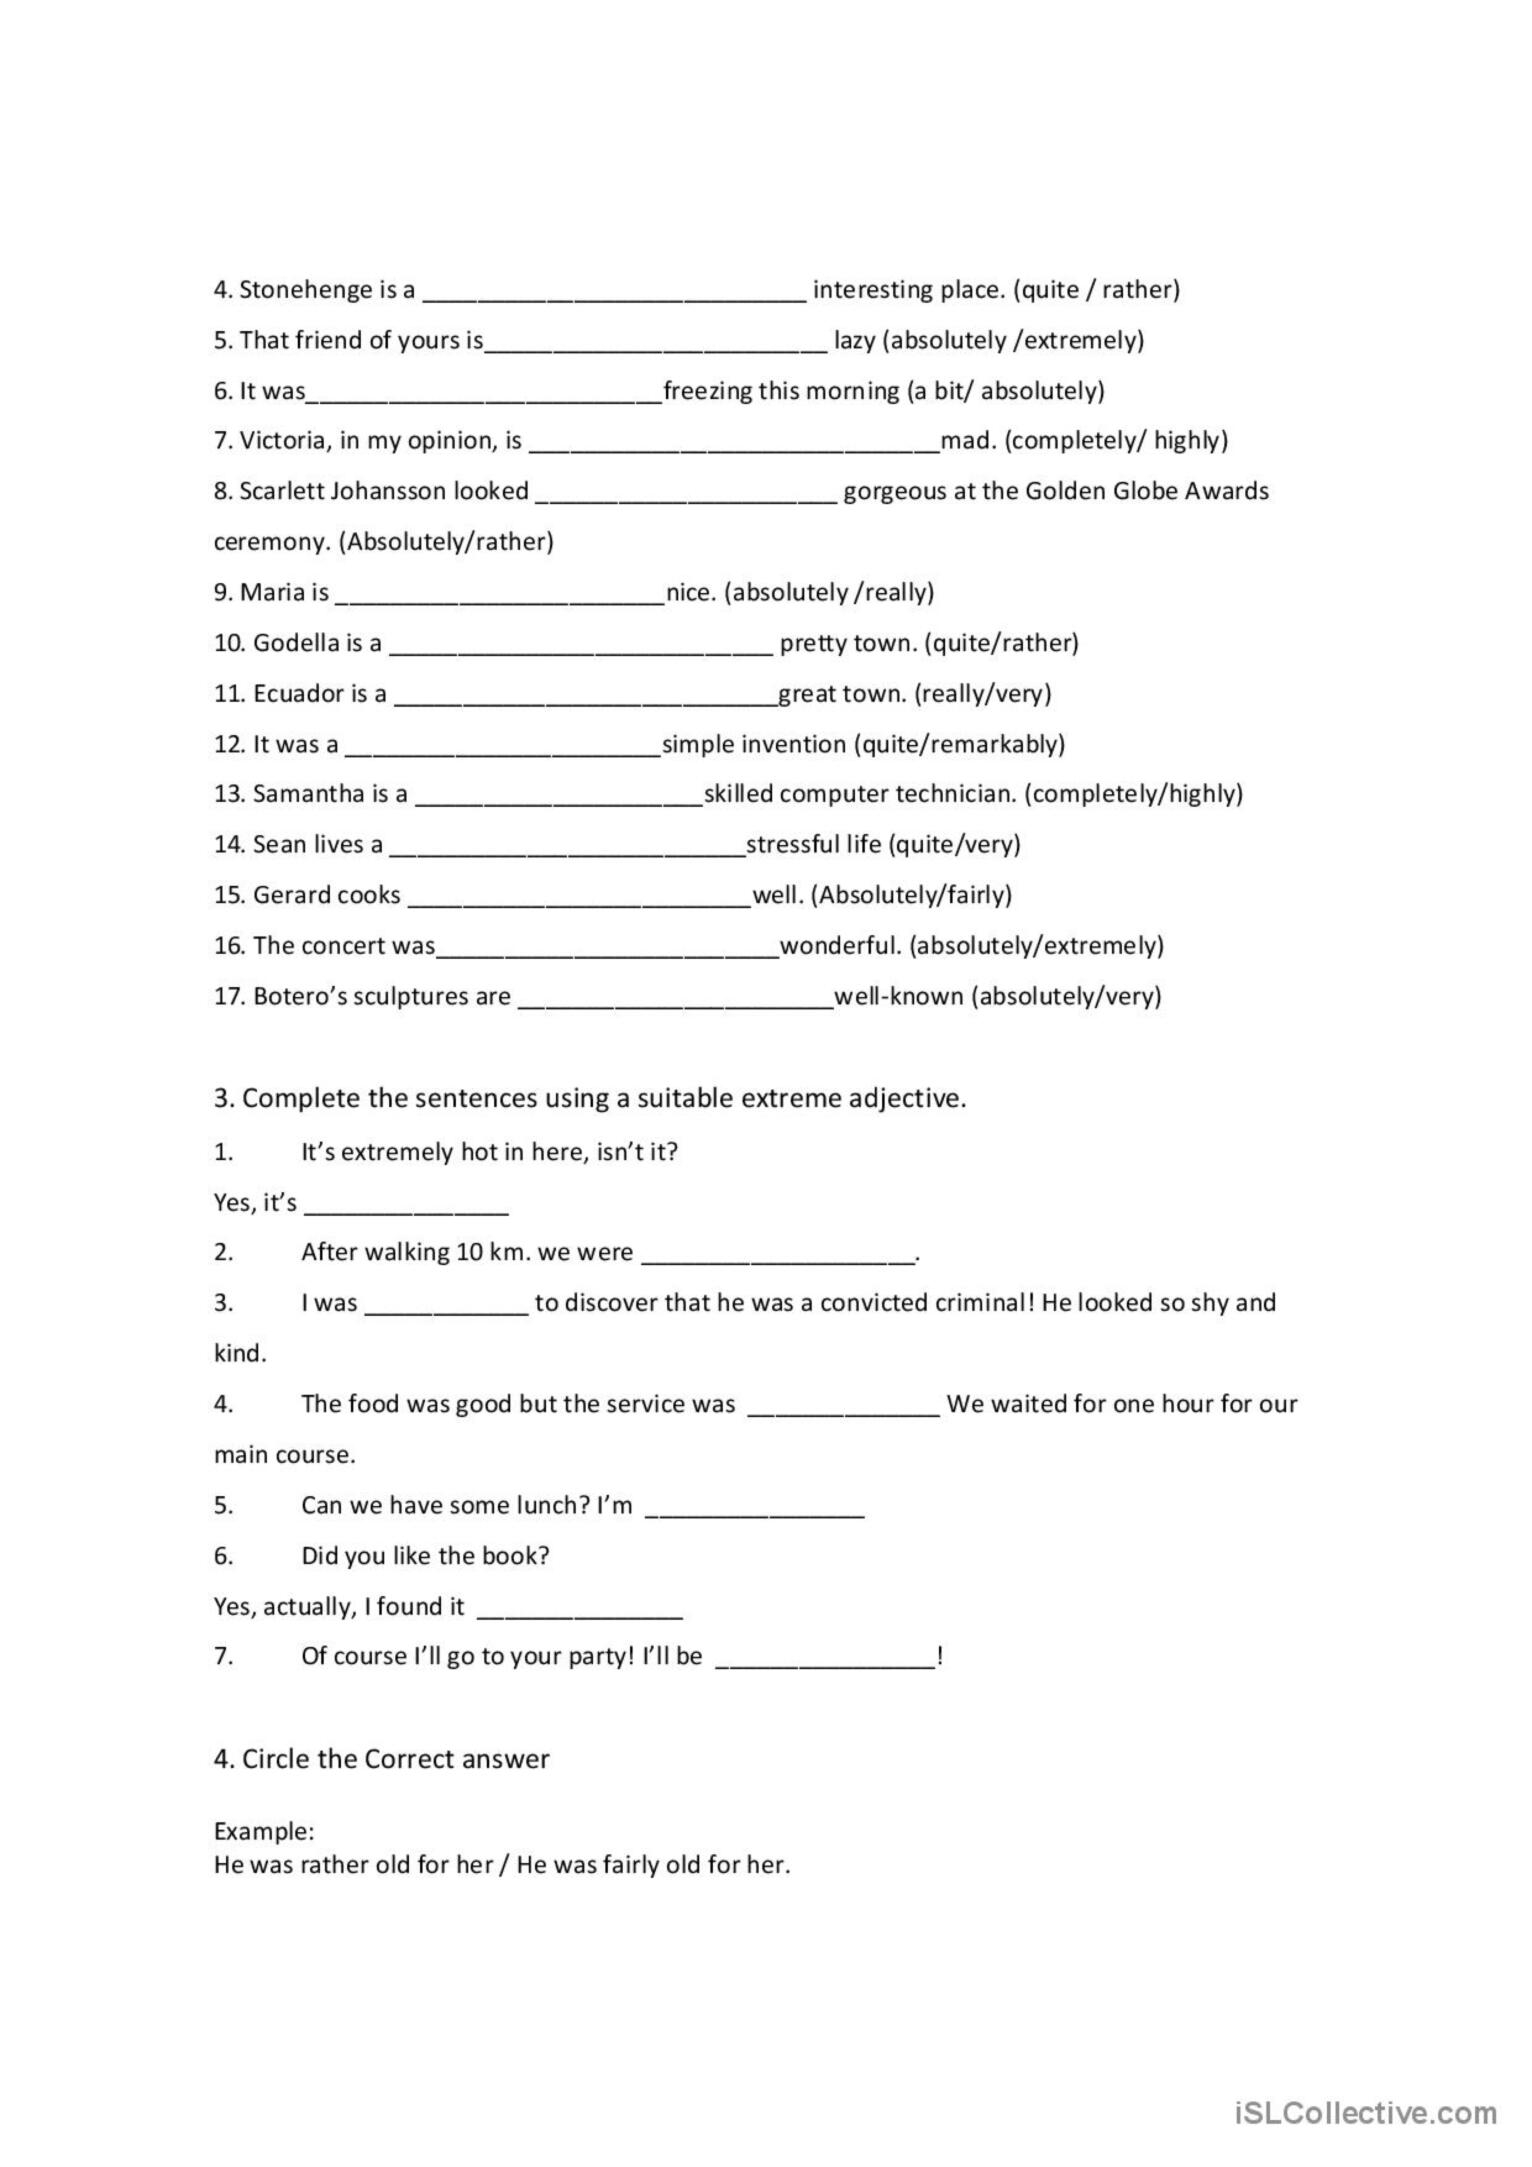 gradable-and-ungradable-adjectives-exercises-worksheets-pdf